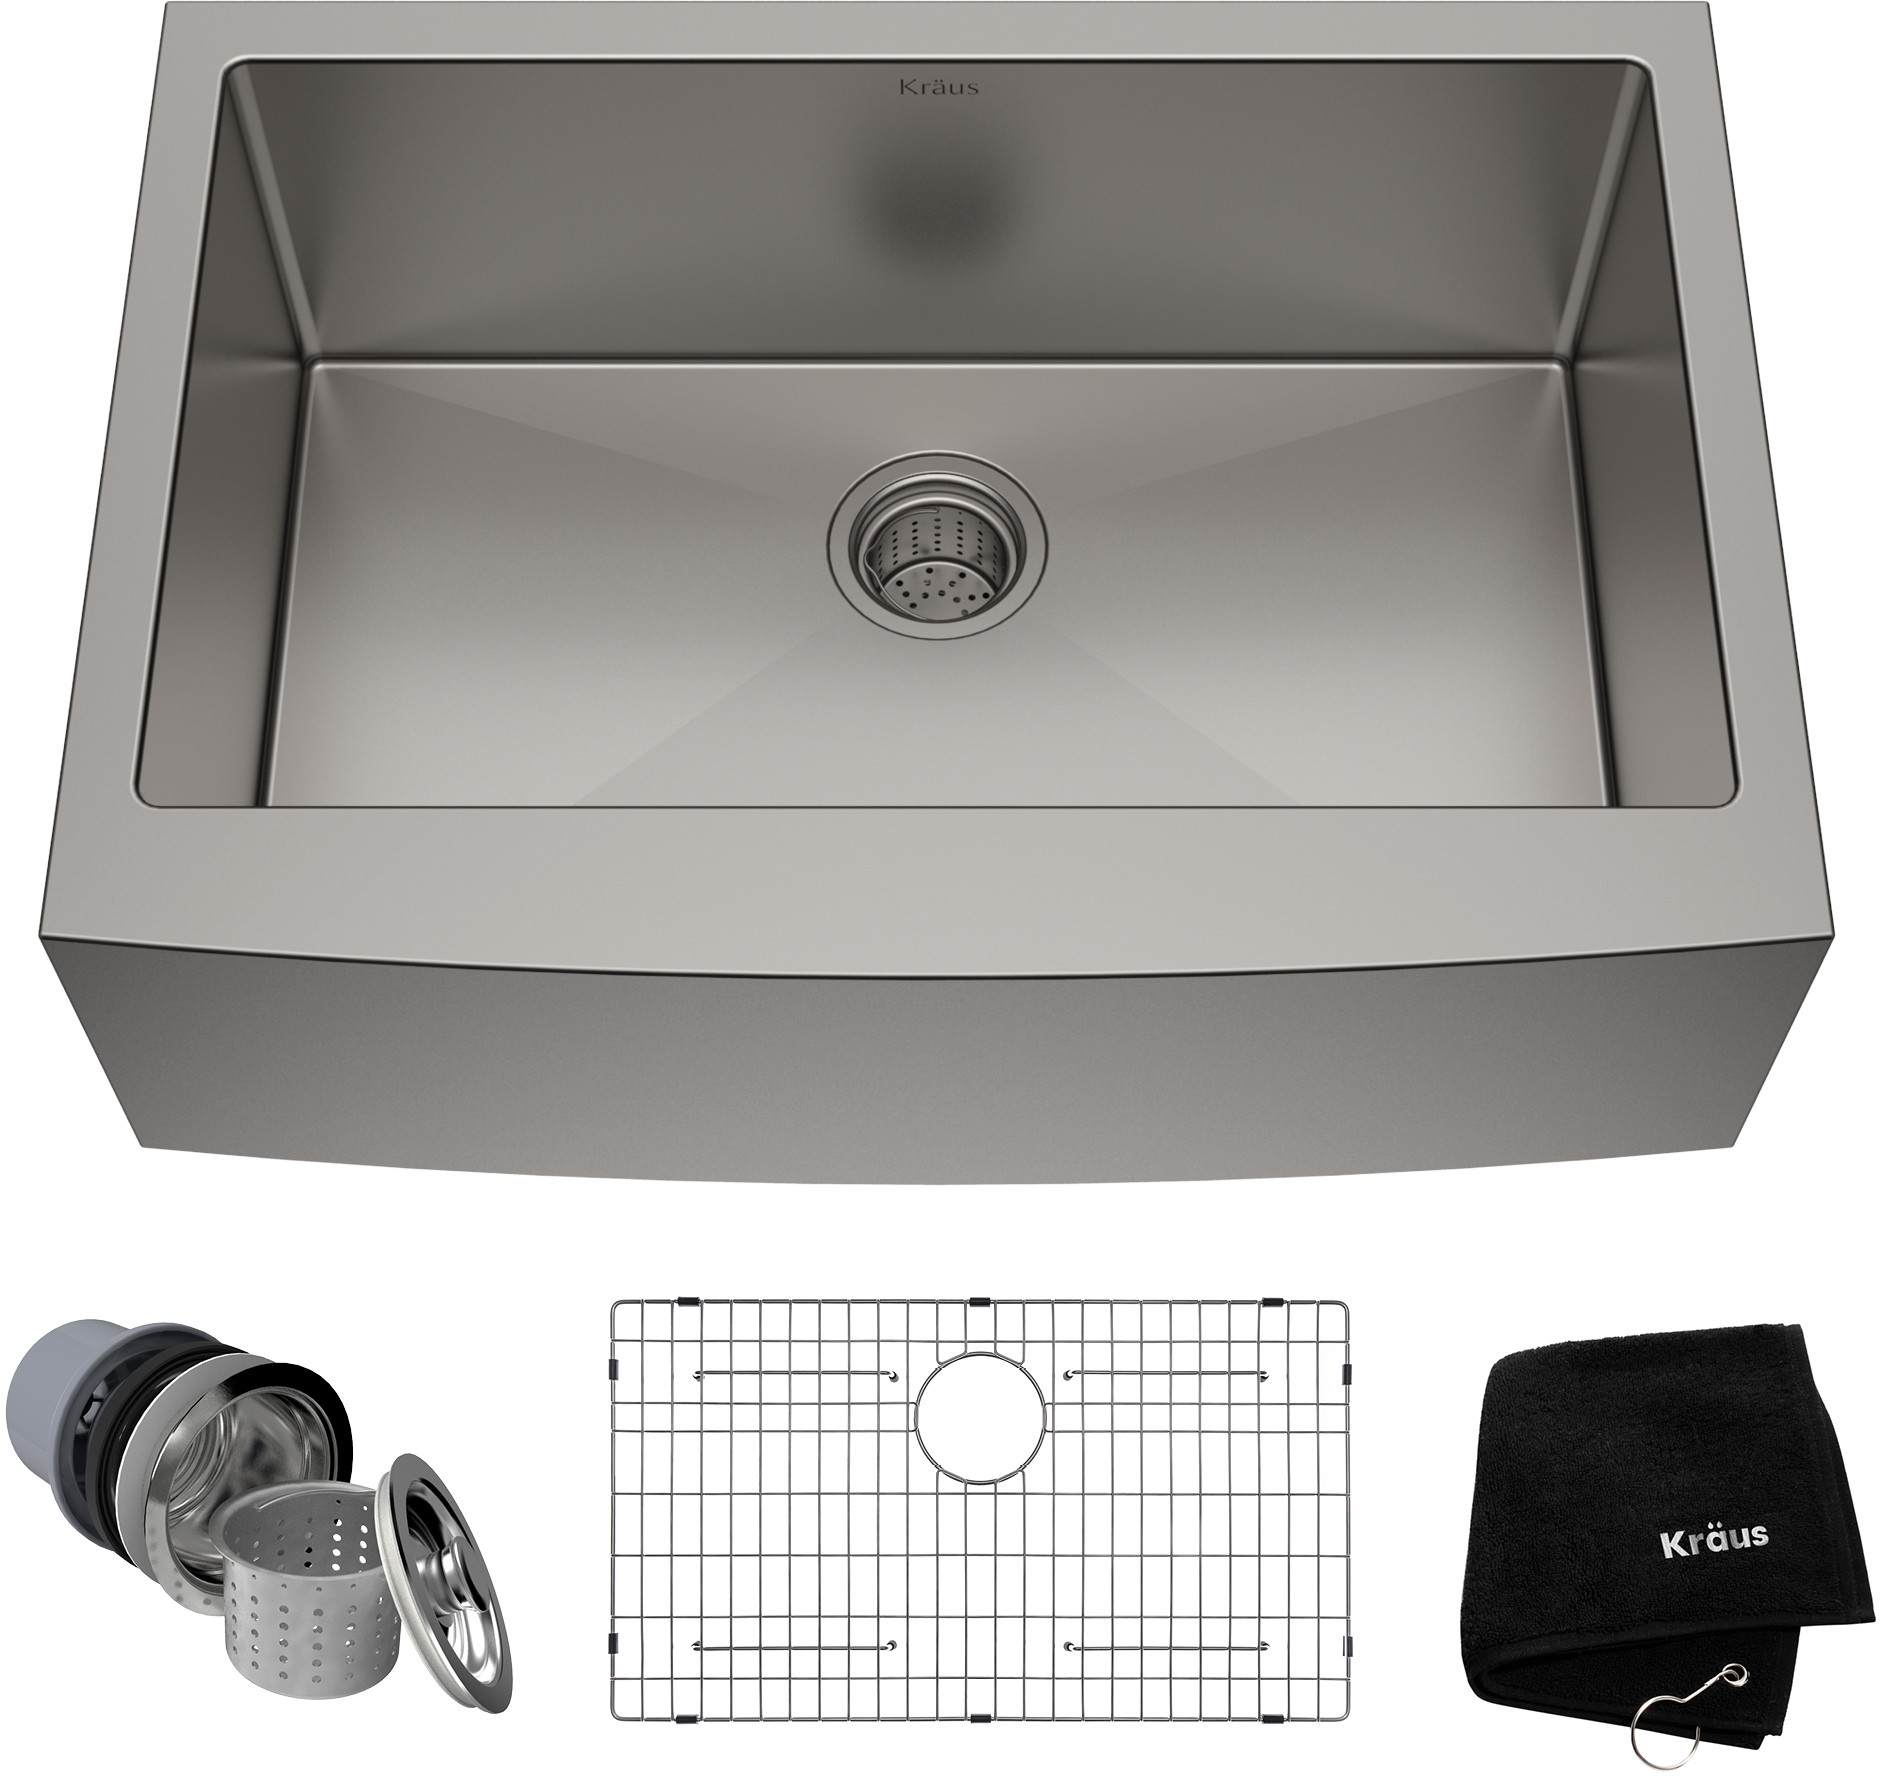 Kraus Khf20030 30 Inch Farmhouse Single Bowl Stainless Steel Kitchen Sink With 16 Gauge 10 Inch Bowl Depth Rear Set Drain Opening And Stone Guard Undercoating